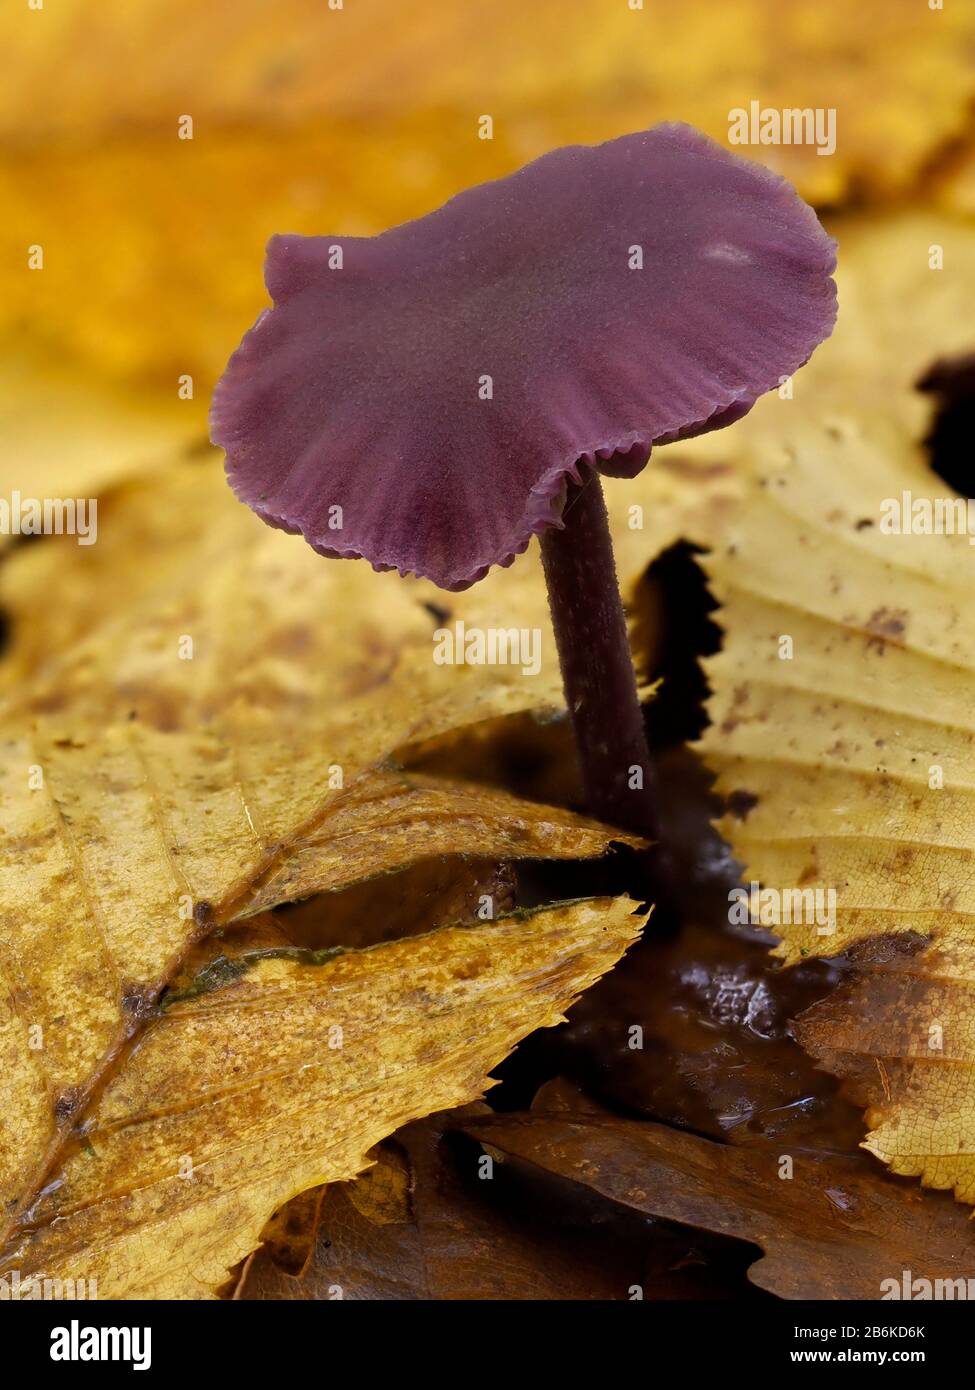 Amethyst Deceiver Fungi, Laccaria amethystina, Dering Woods, Kent UK, stacked image Stock Photo